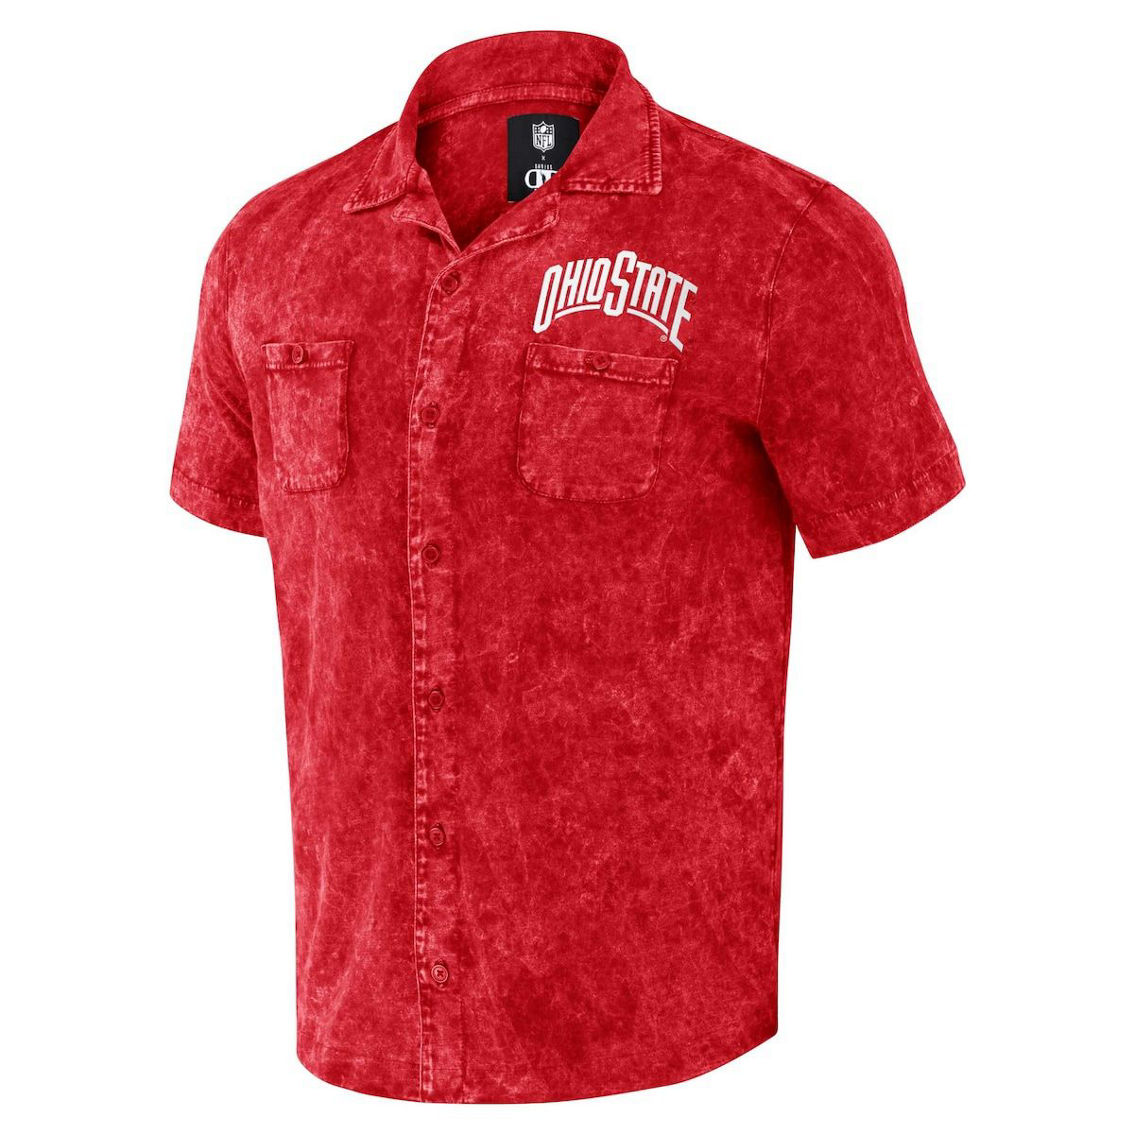 Darius Rucker Collection by Fanatics Men's Darius Rucker Collection by Fanatics Scarlet Ohio State Buckeyes Team Color Button-Up Shirt - Image 3 of 4